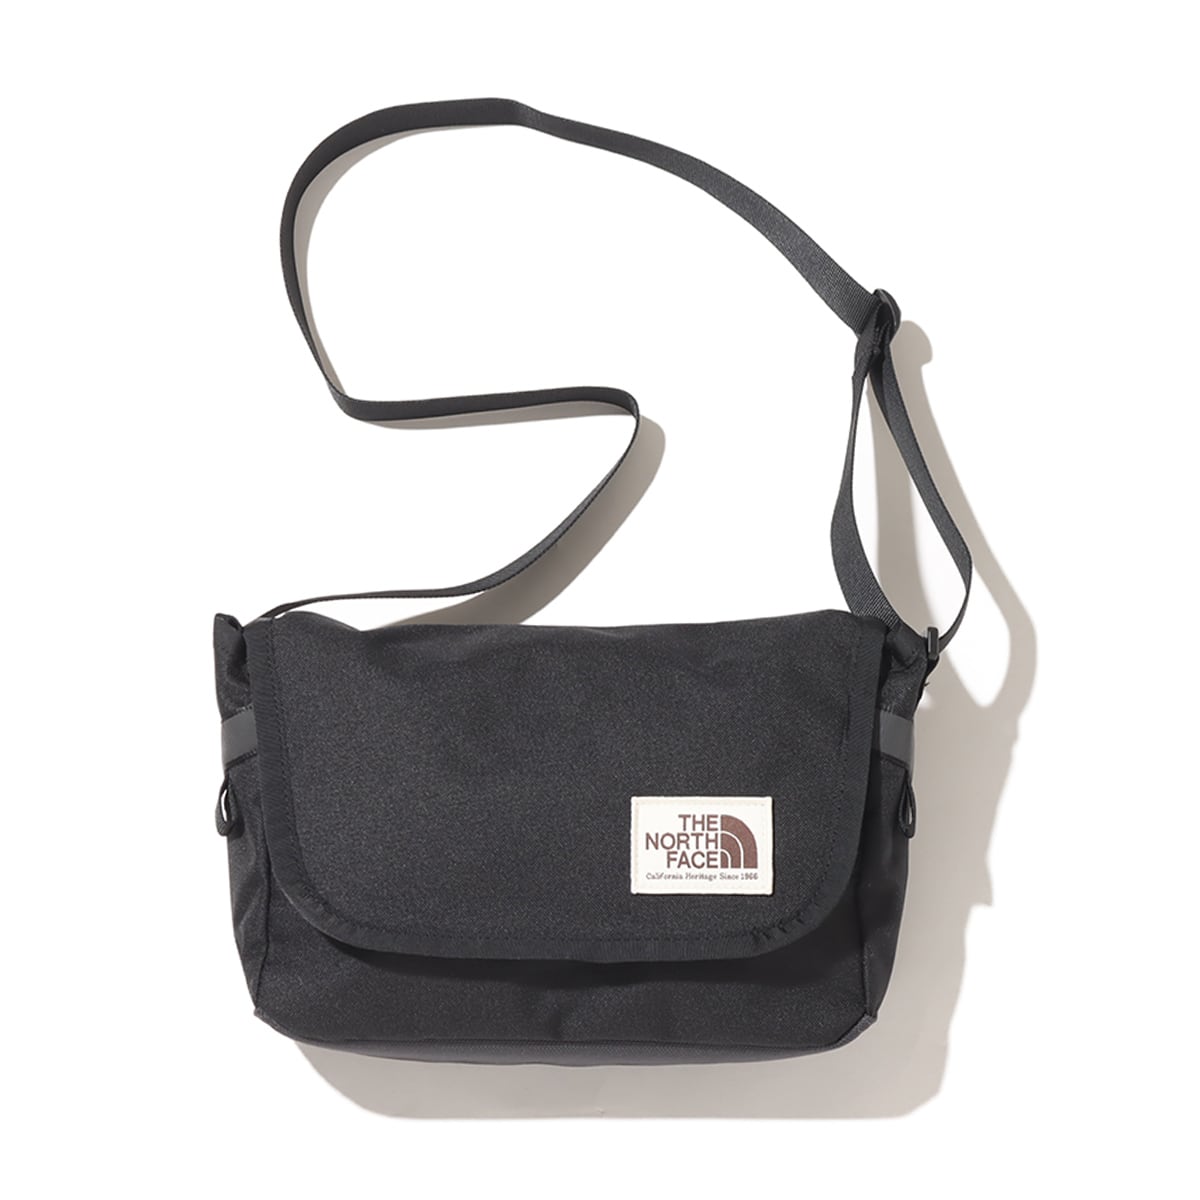 THE NORTH FACE KIDS SHOULDER POUCH BLACK 23FW-I